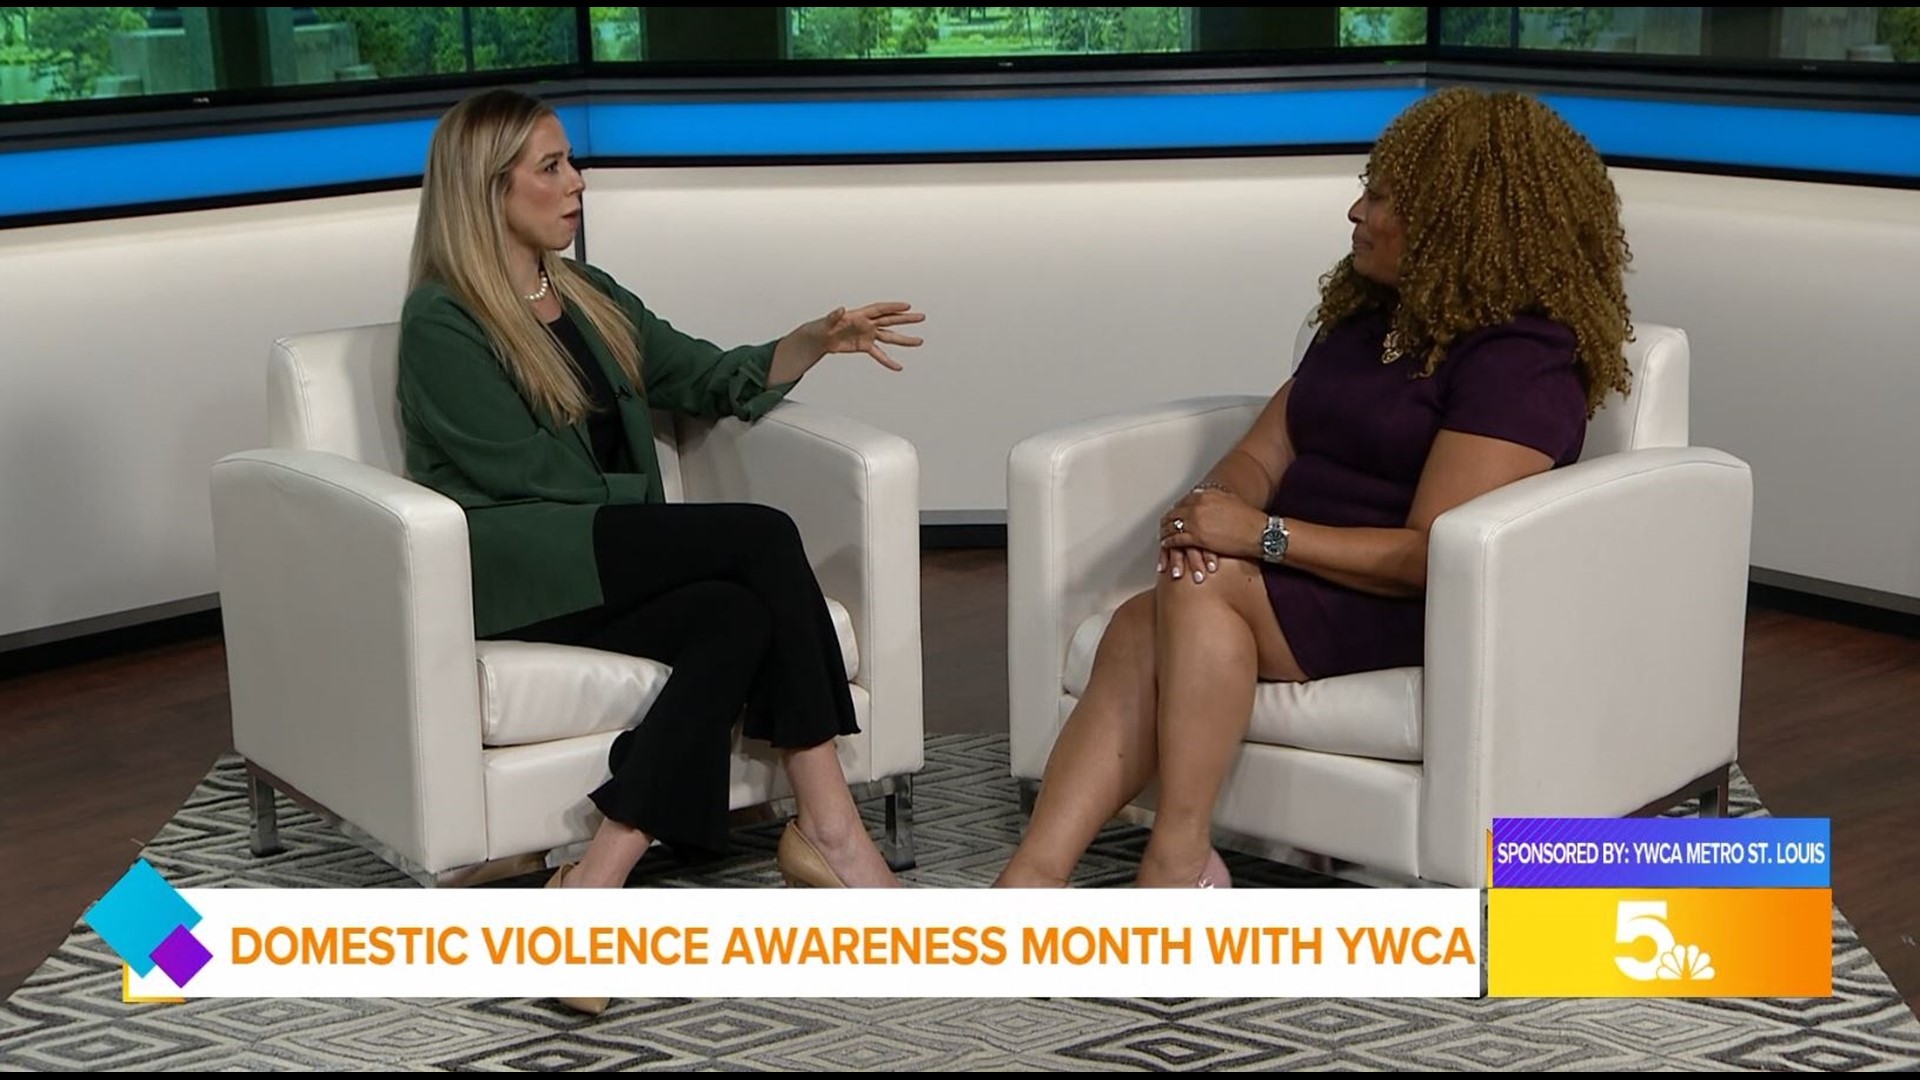 There are resources available for anyone going through domestic violence. You are not alone.